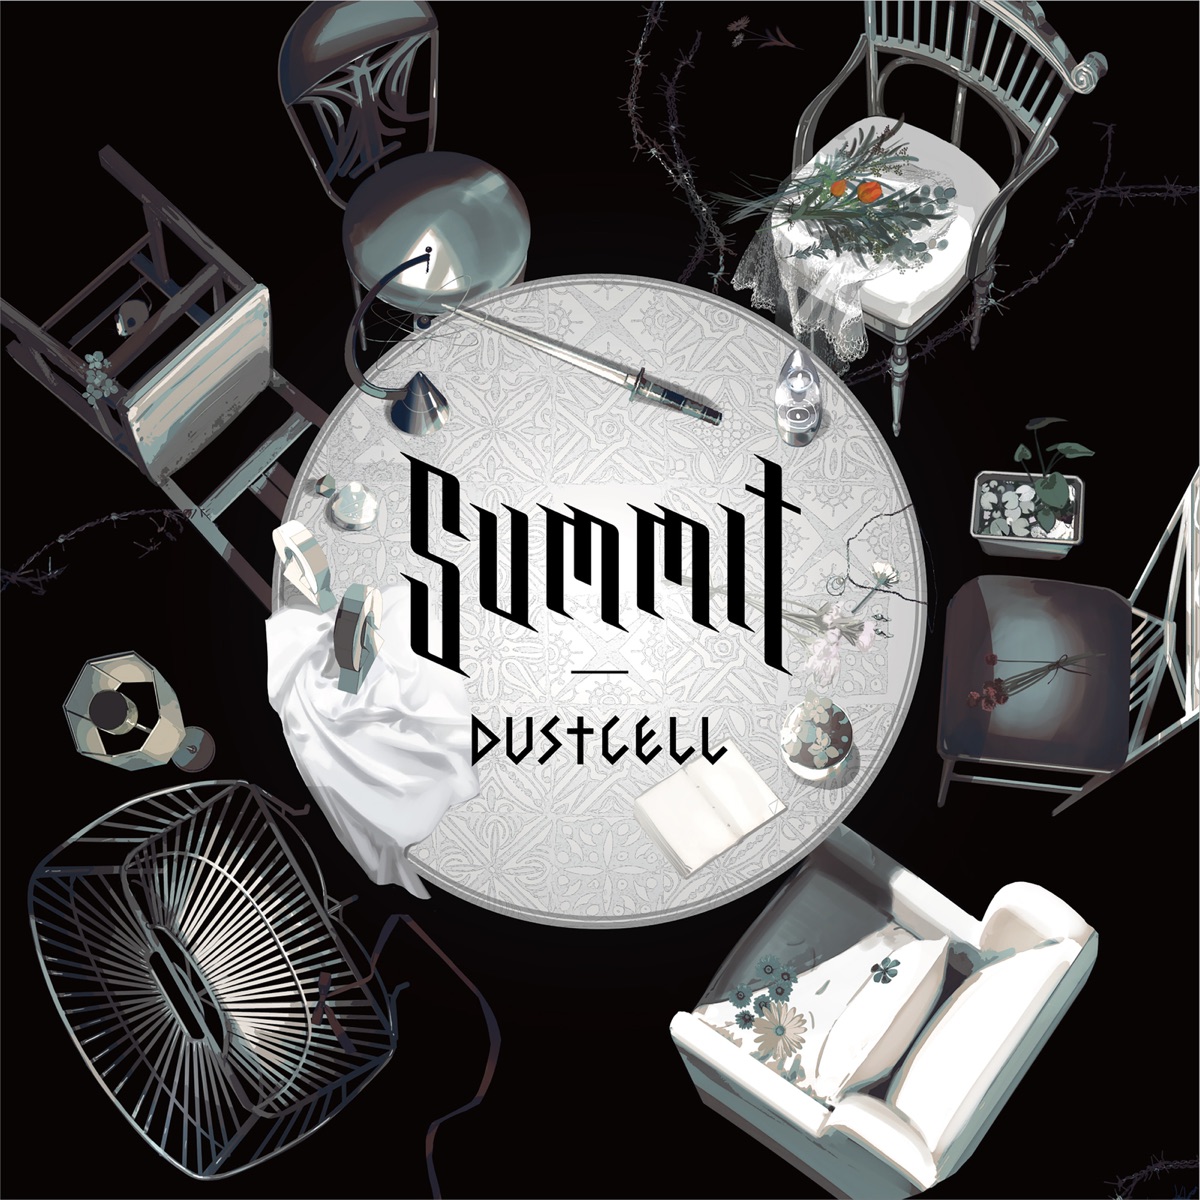 Cover for『DUSTCELL - CULT』from the release『SUMMIT』